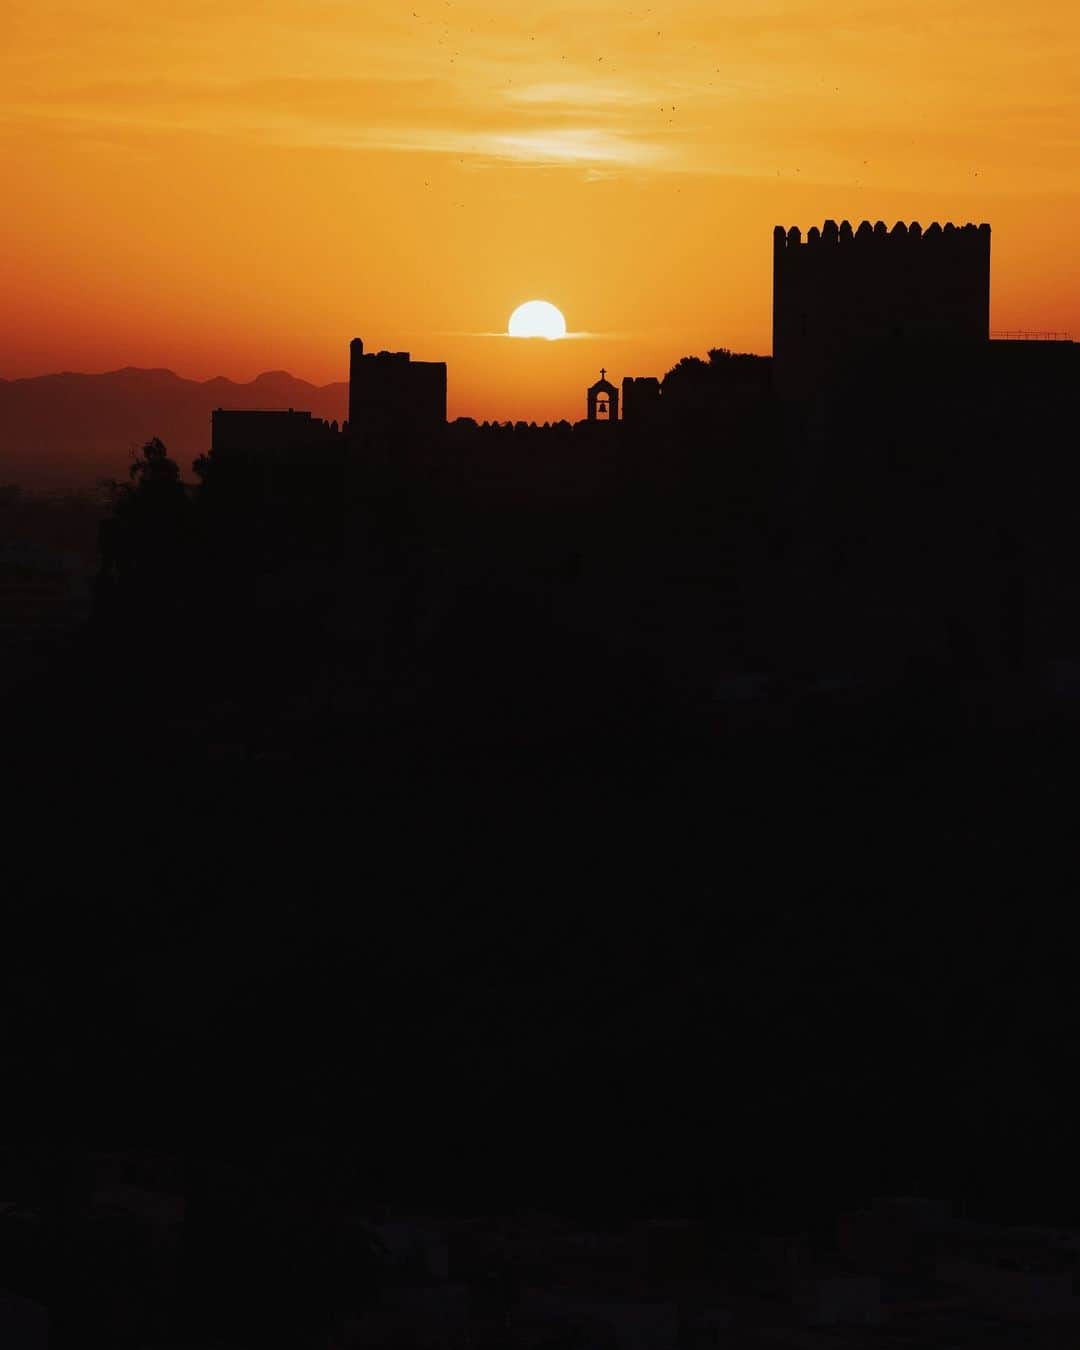 Alex Strohlのインスタグラム：「Time traveling in Andalusia… I was treated to the regions legendary sunrises a few days ago while on a morning walk through a completely unknown neighborhood of Almeria.  I knew that I would get a nice view of the Alcazaba Castle and that the sun should rise behind it but when we headed out it was pretty overcast and there was low hope for the sunrise I dreamt of. As it is often the case, you never know, because the sun peaked exactly where it should have had and I was exactly at the right spot.   Gracias, Almeria.  #framesofandalucia」